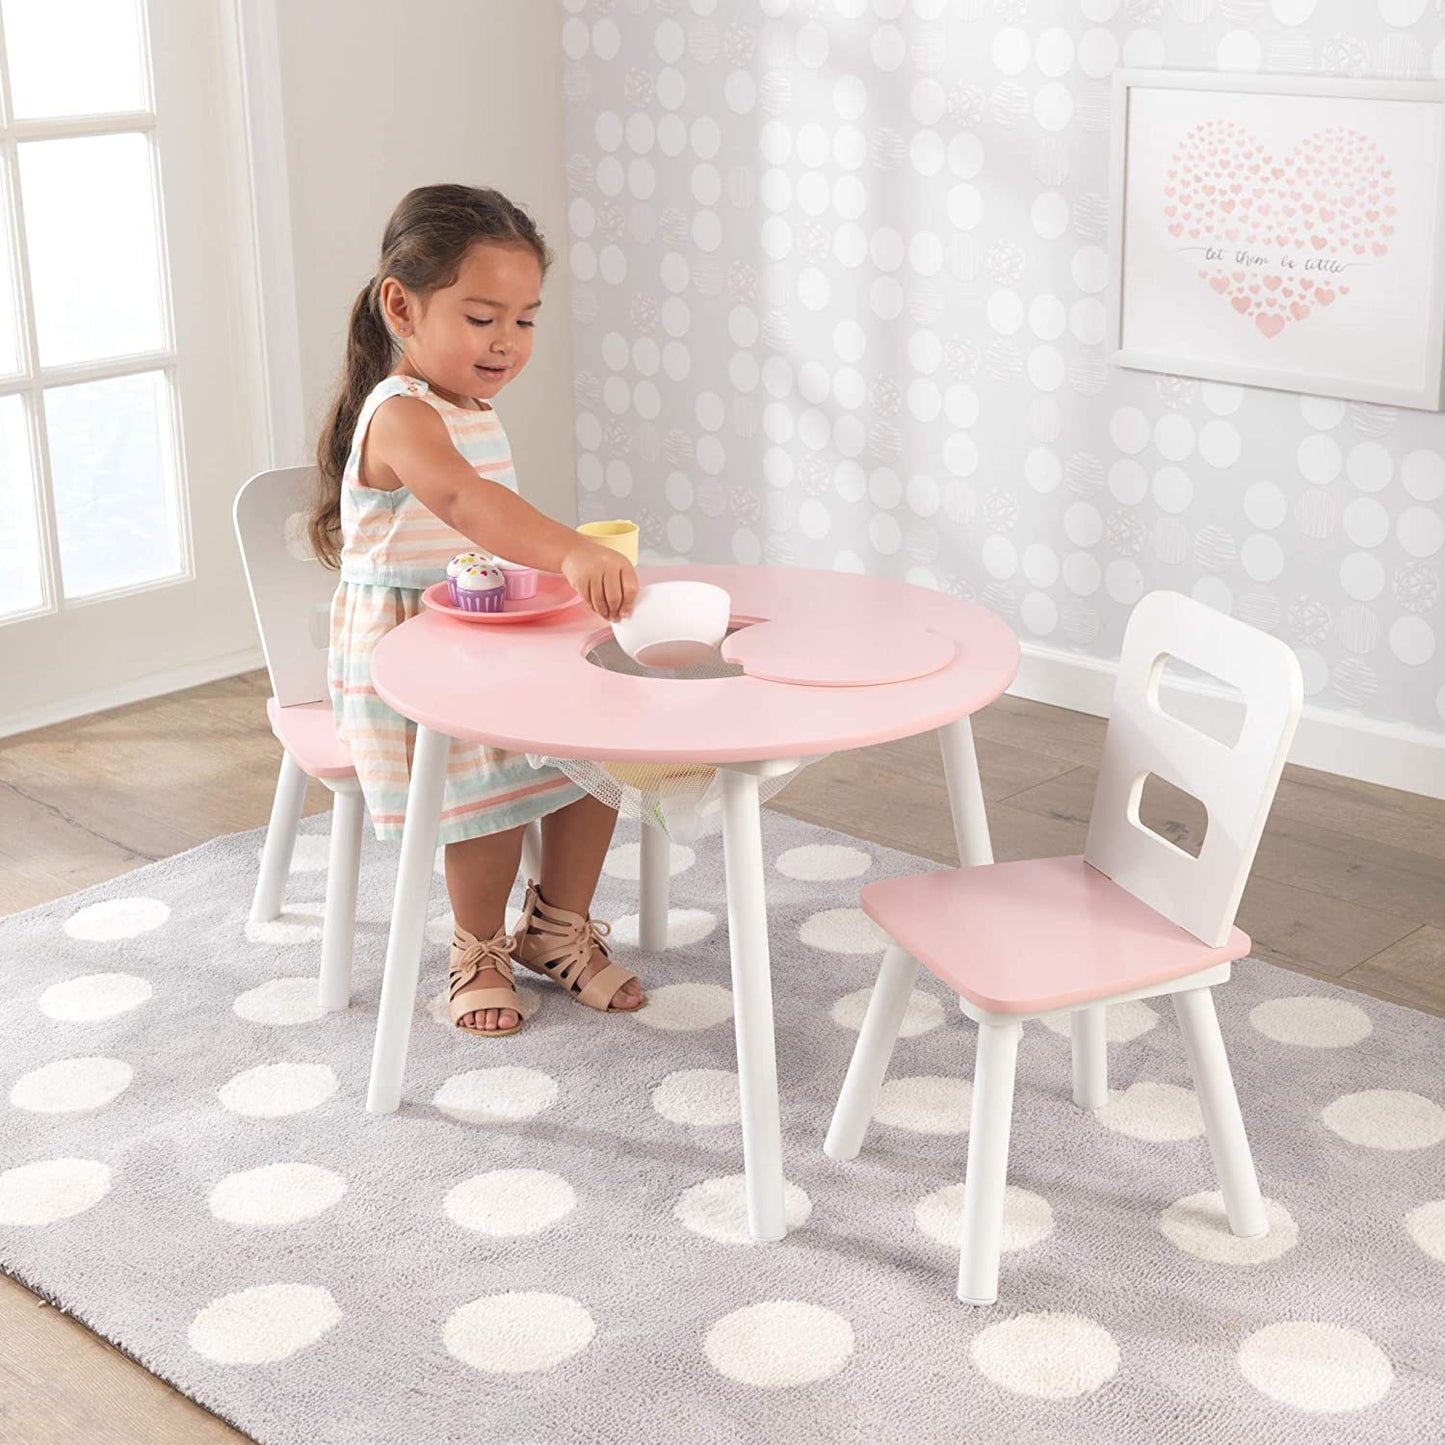 Round Table and 2 Chair Set for children (White and Pink) - Little Kids Business